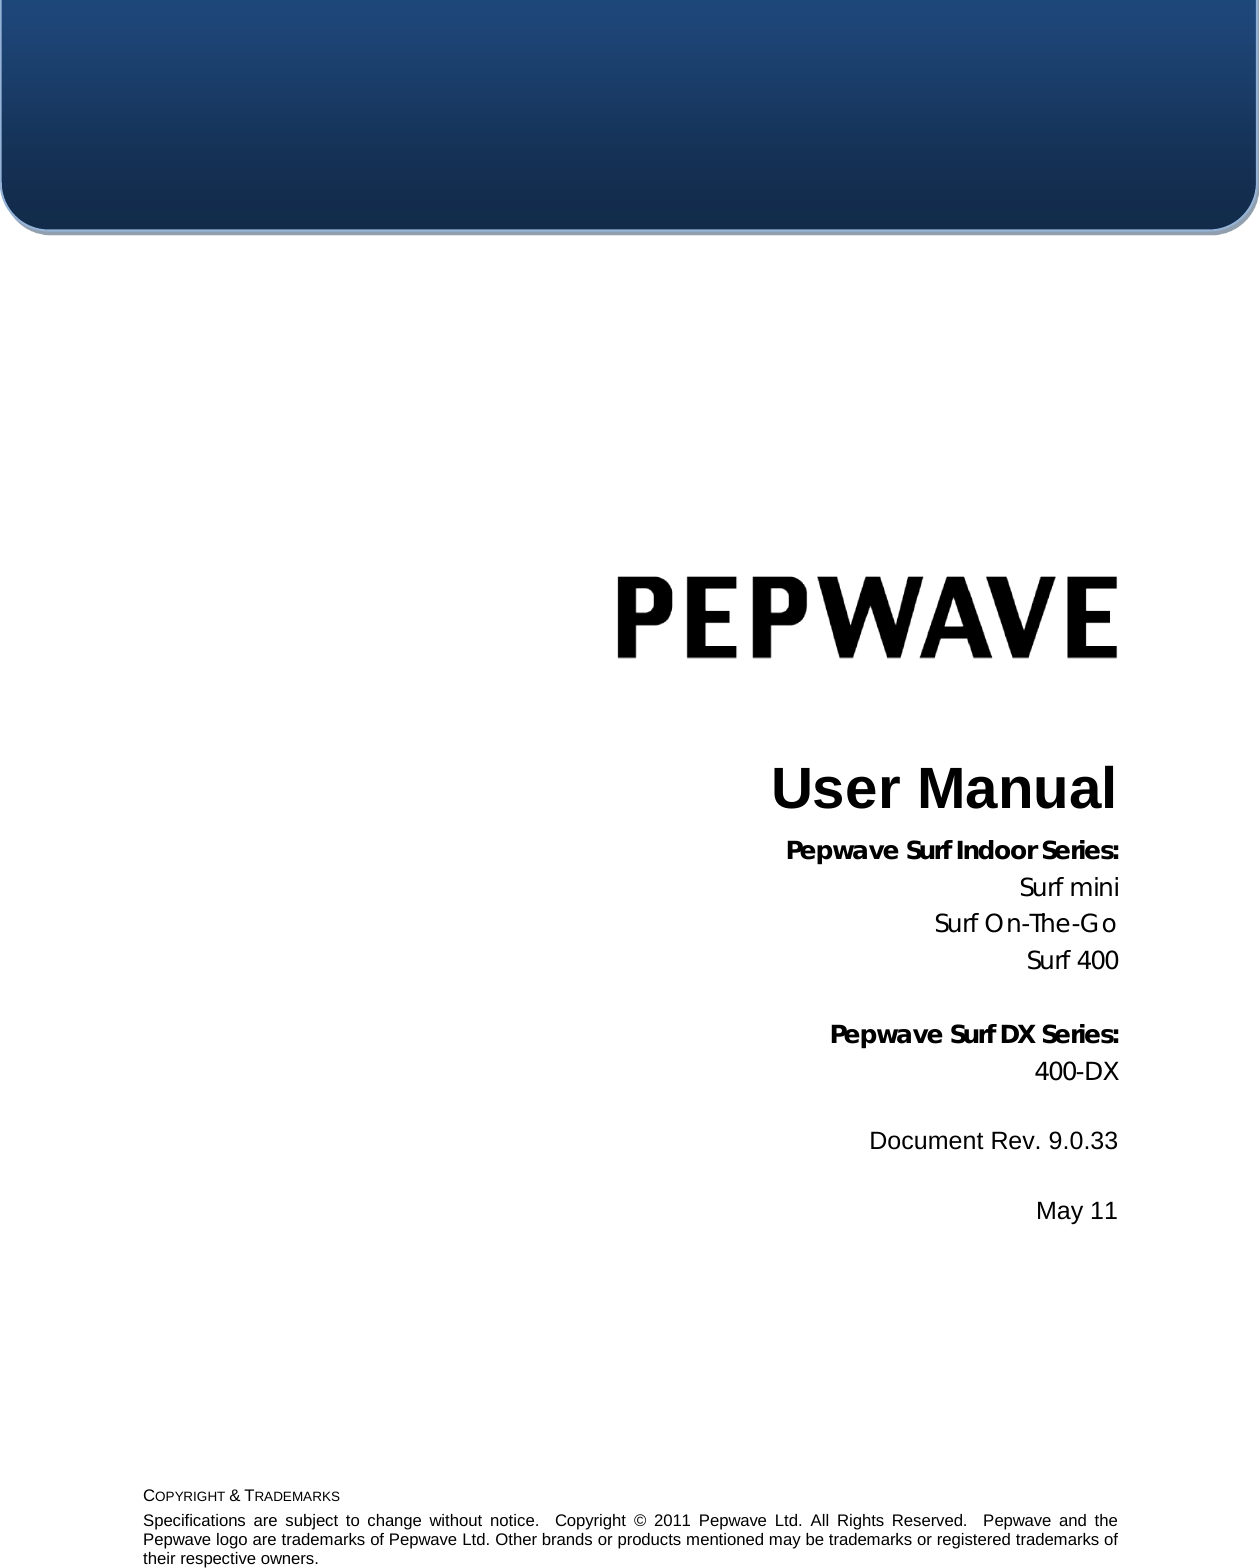  COPYRIGHT &amp; TRADEMARKS Specifications are subject to change without notice.  Copyright ©  2011 Pepwave  Ltd. All Rights Reserved.  Pepwave and the Pepwave logo are trademarks of Pepwave Ltd. Other brands or products mentioned may be trademarks or registered trademarks of their respective owners.     User Manual Pepwave Surf Indoor Series:  Surf mini Surf On-The-Go Surf 400  Pepwave Surf DX Series:  400-DX  Document Rev. 9.0.33  May 11 